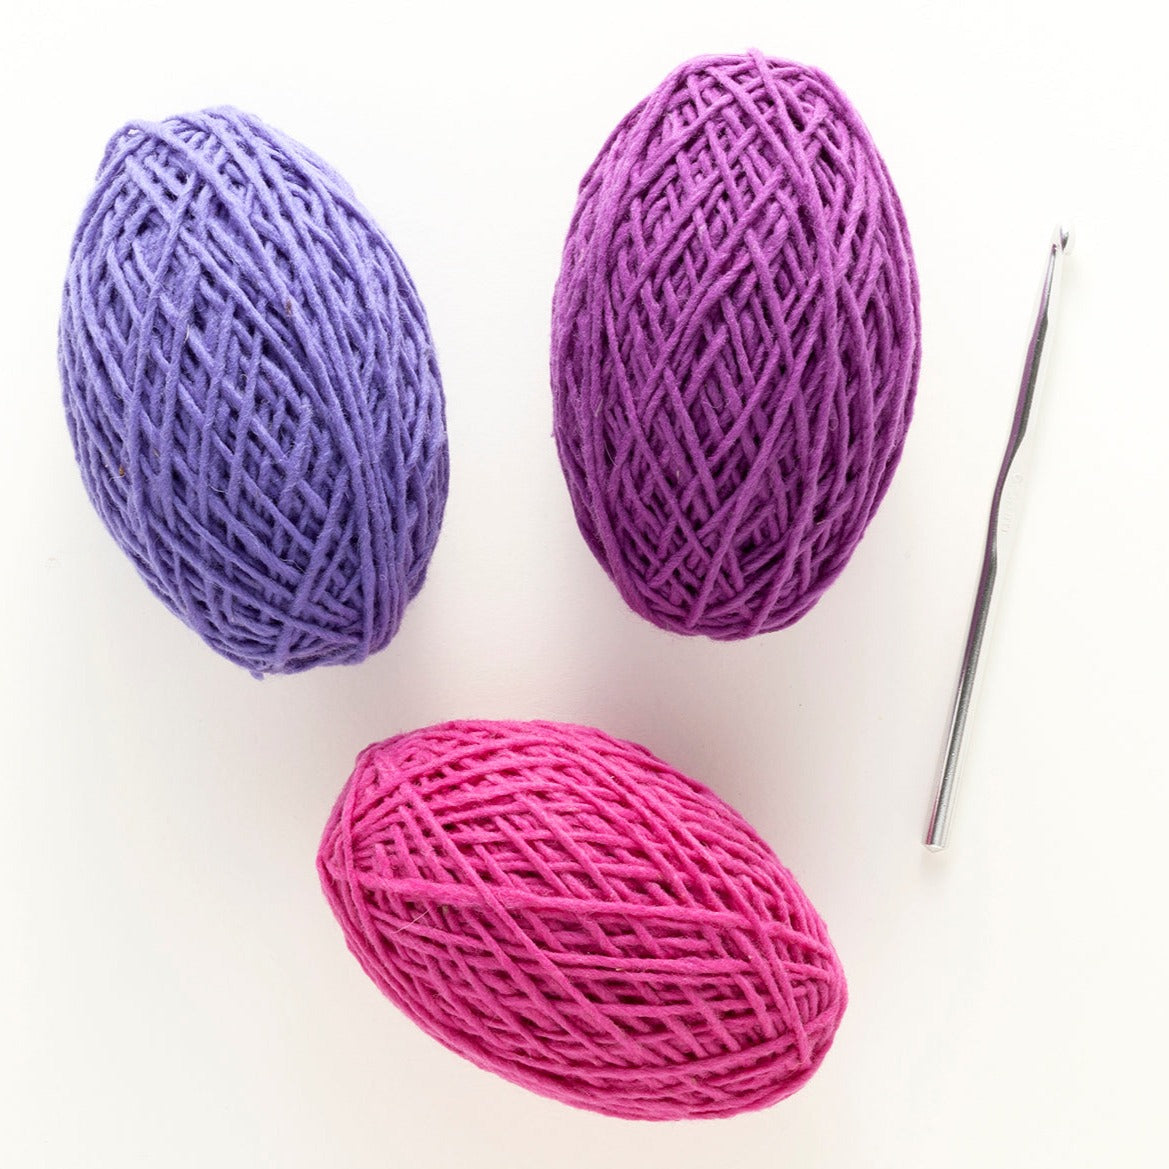 Discover Crochet: Scarf Kit – Berry